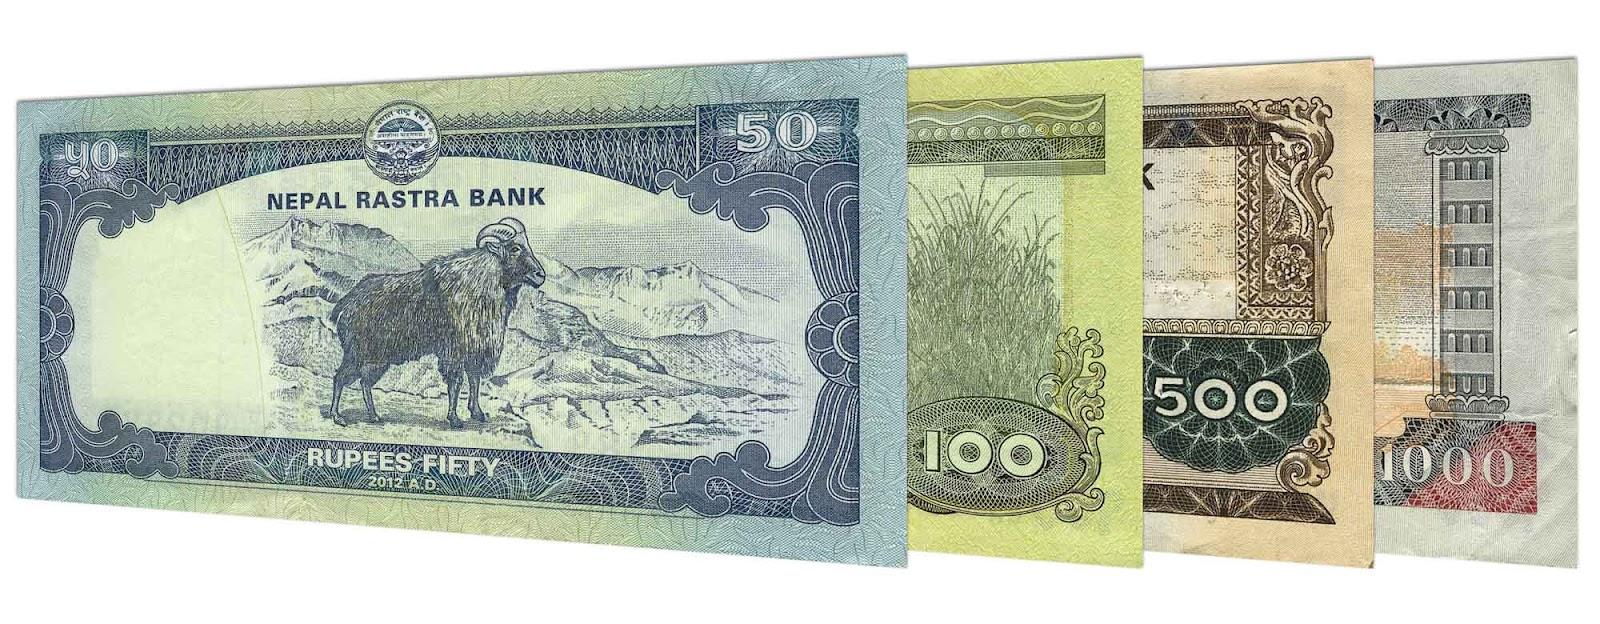 Nepalese rupees banknotes 